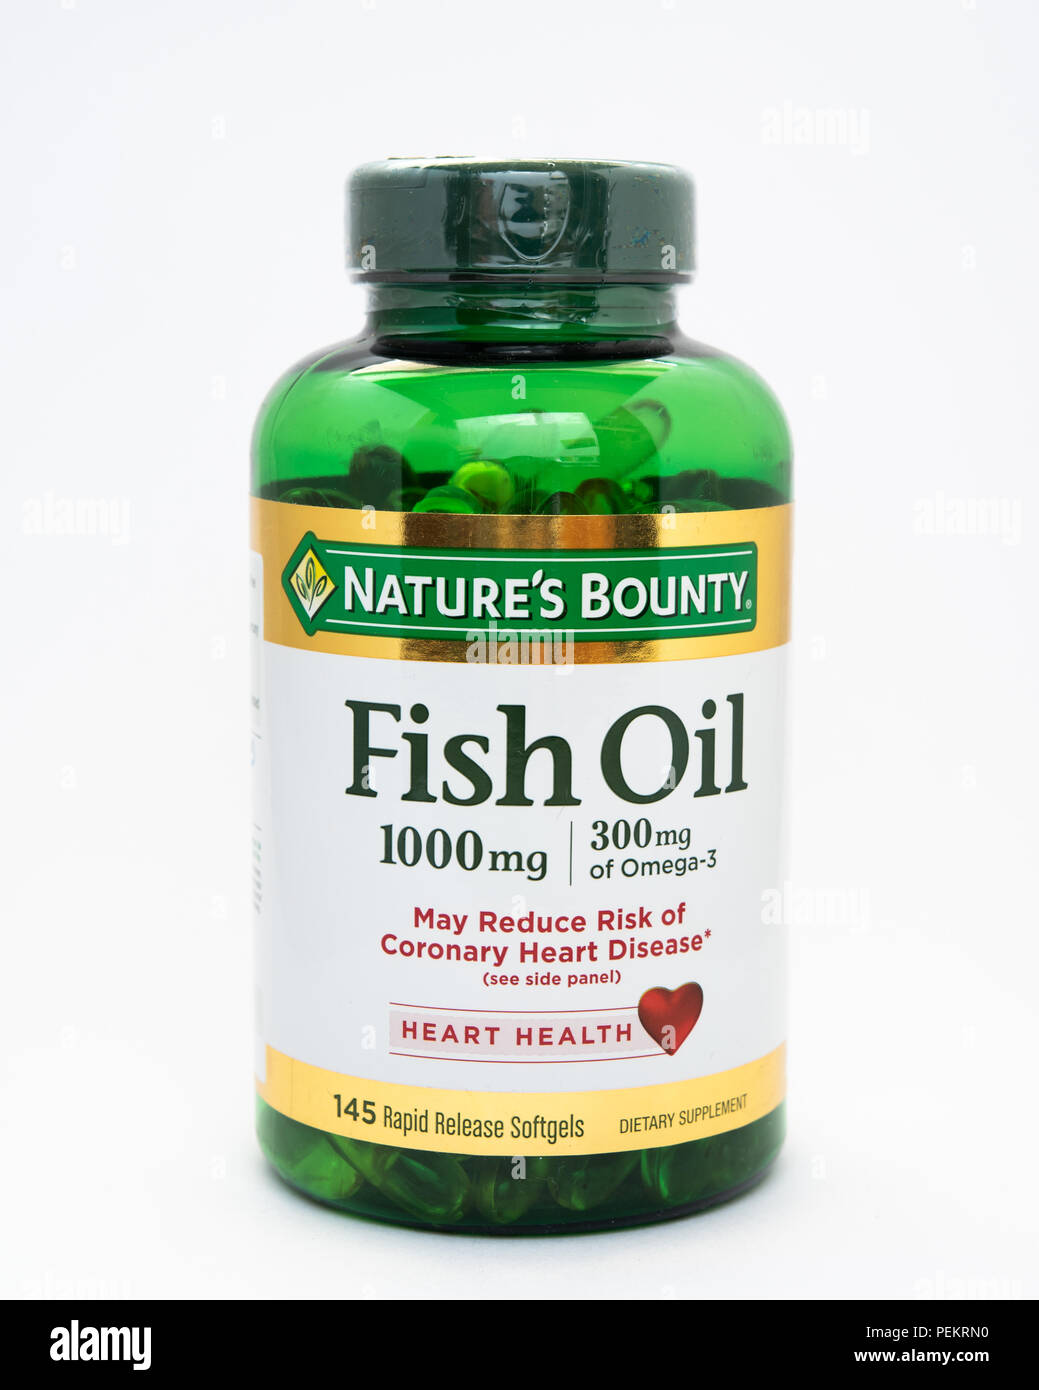 A green bottle of 1000 mg Softgels of fish oil by Nature's Bounty, for promoting heart health. Stock Photo